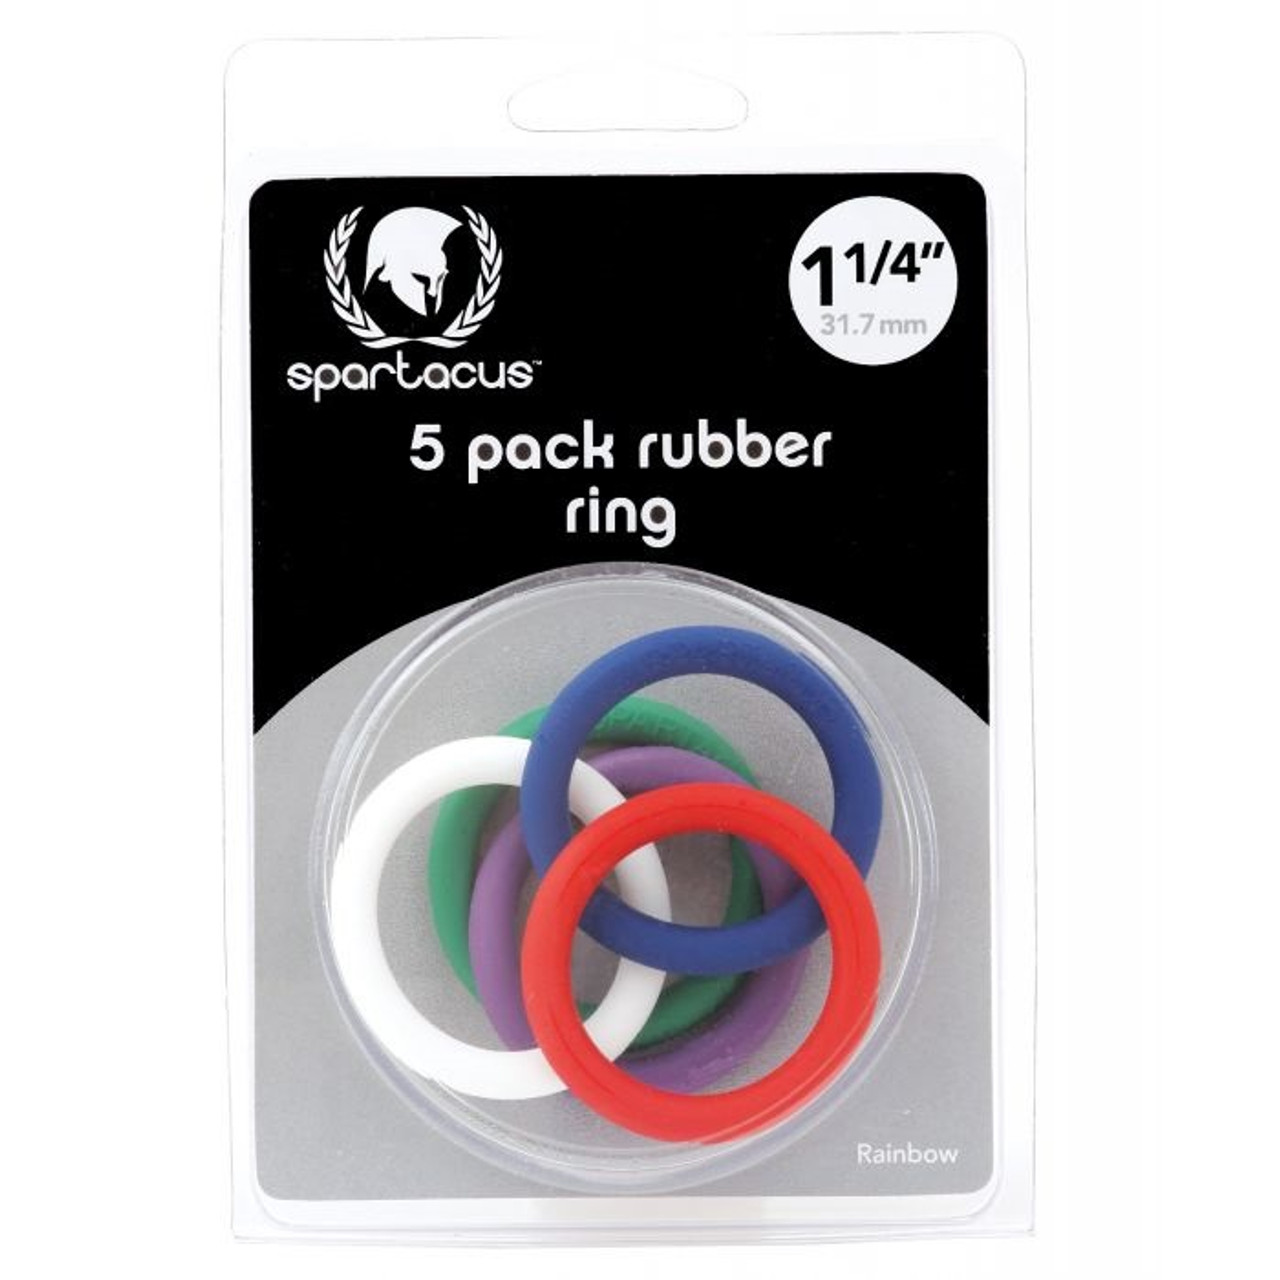 Spartacus 5 Pack Rubber Ring - 1.25"